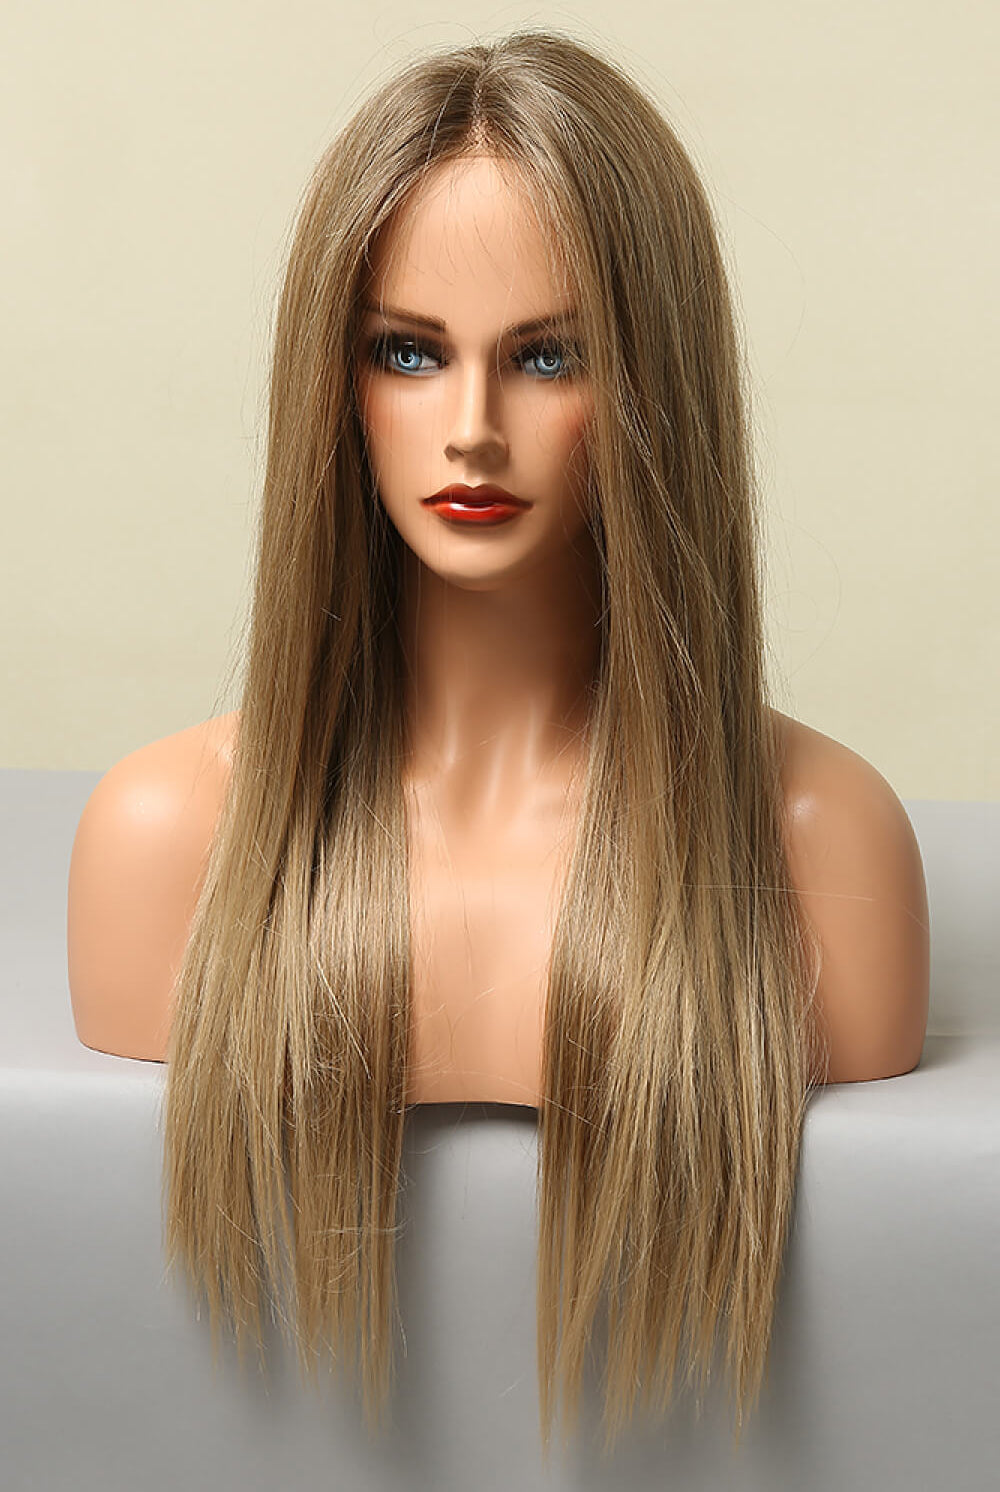 Tan Golden Hour 13*2" Long Straight Lace Front Synthetic Wigs 26" Long 150% Density- Blonde Wigs